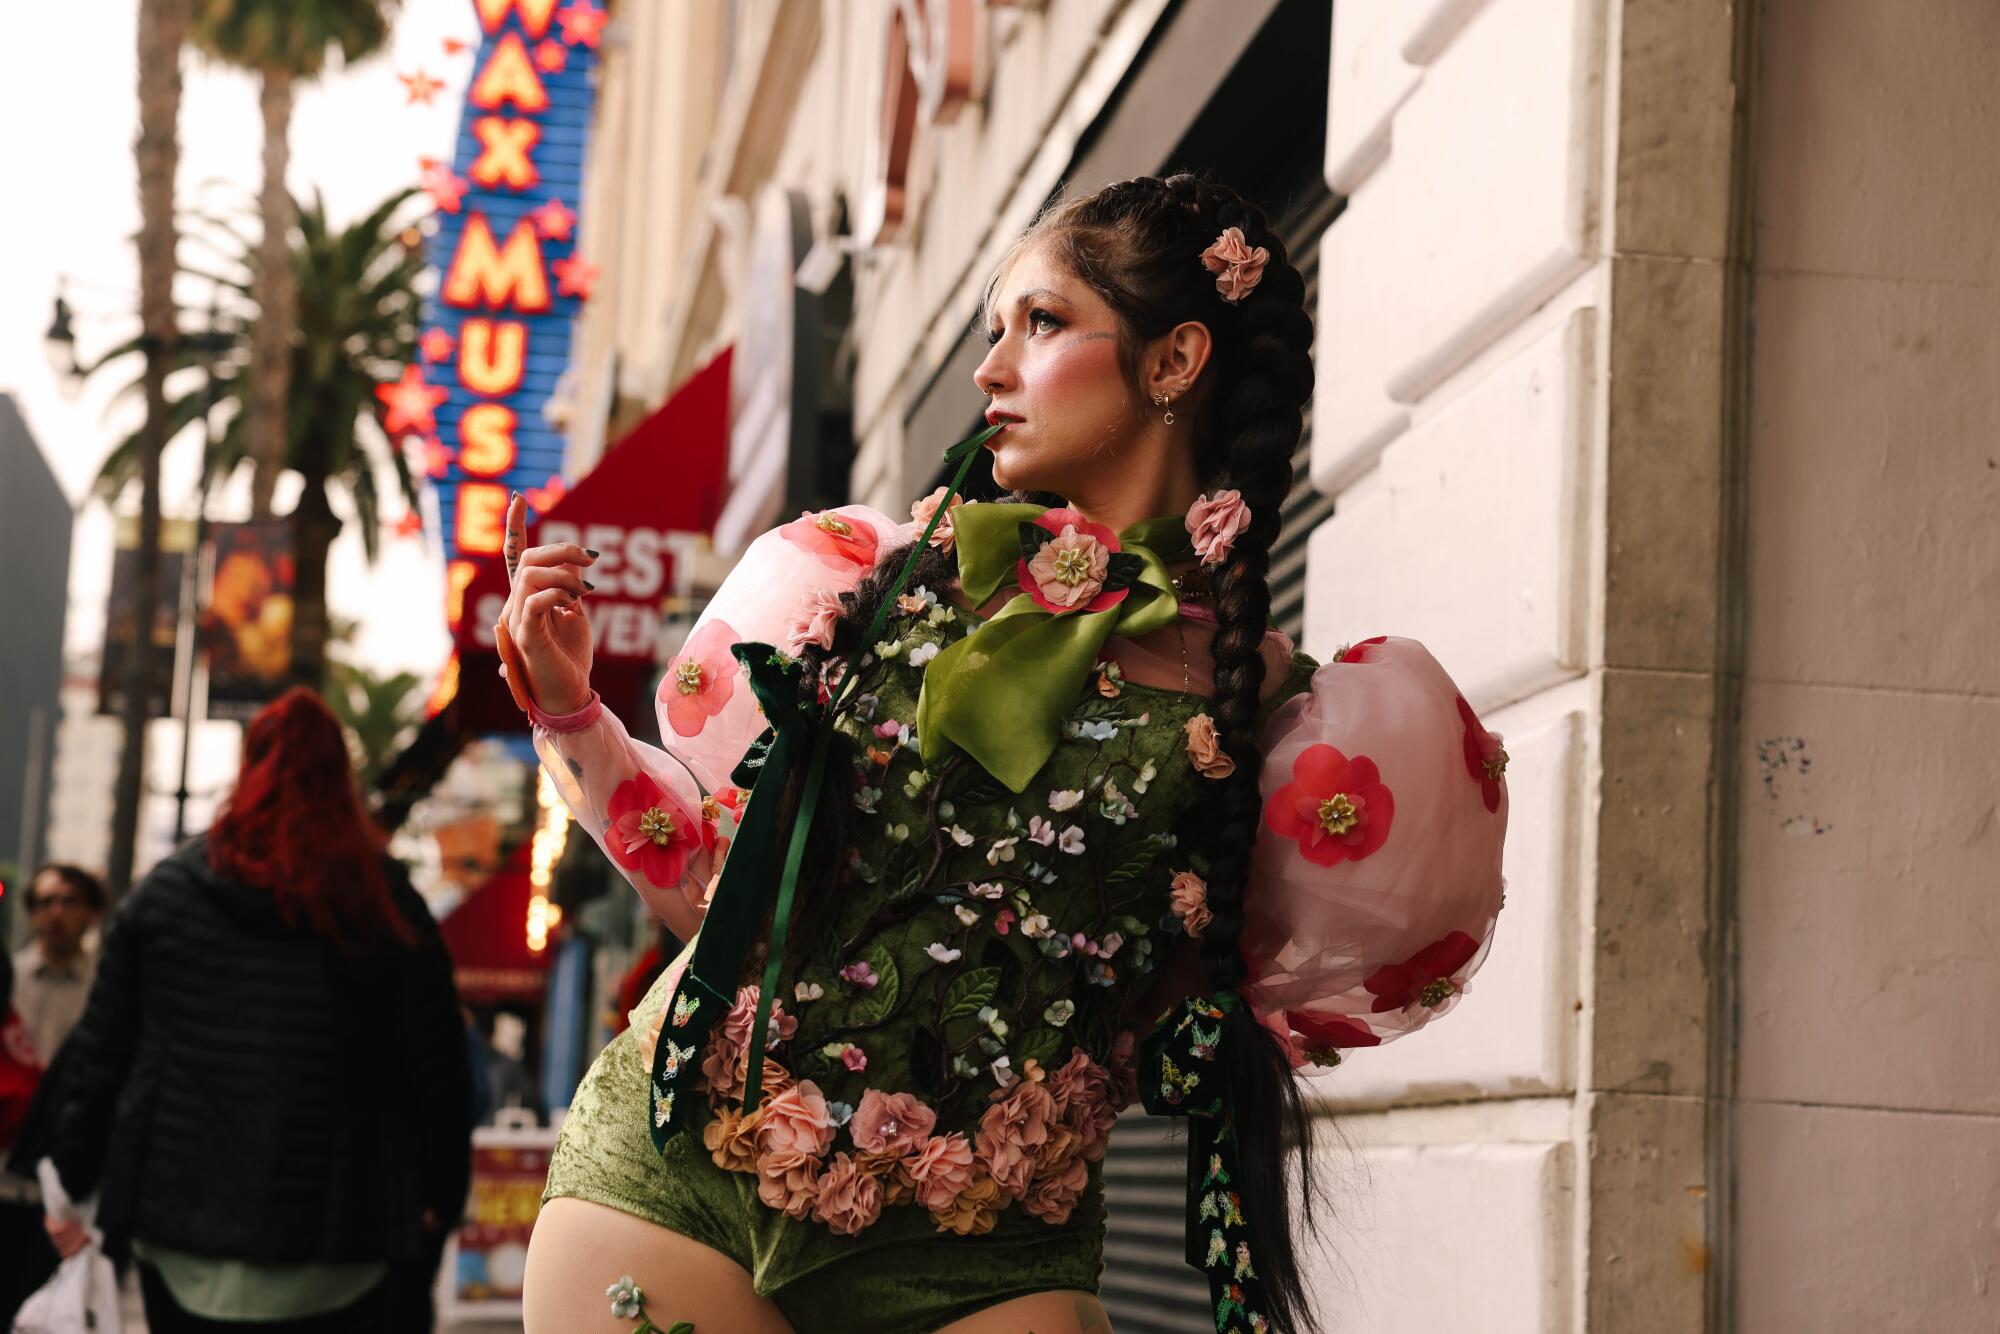  Sierra Ferrell poses in a flowery outfit with puffy sleeves on Hollywood Boulevard.